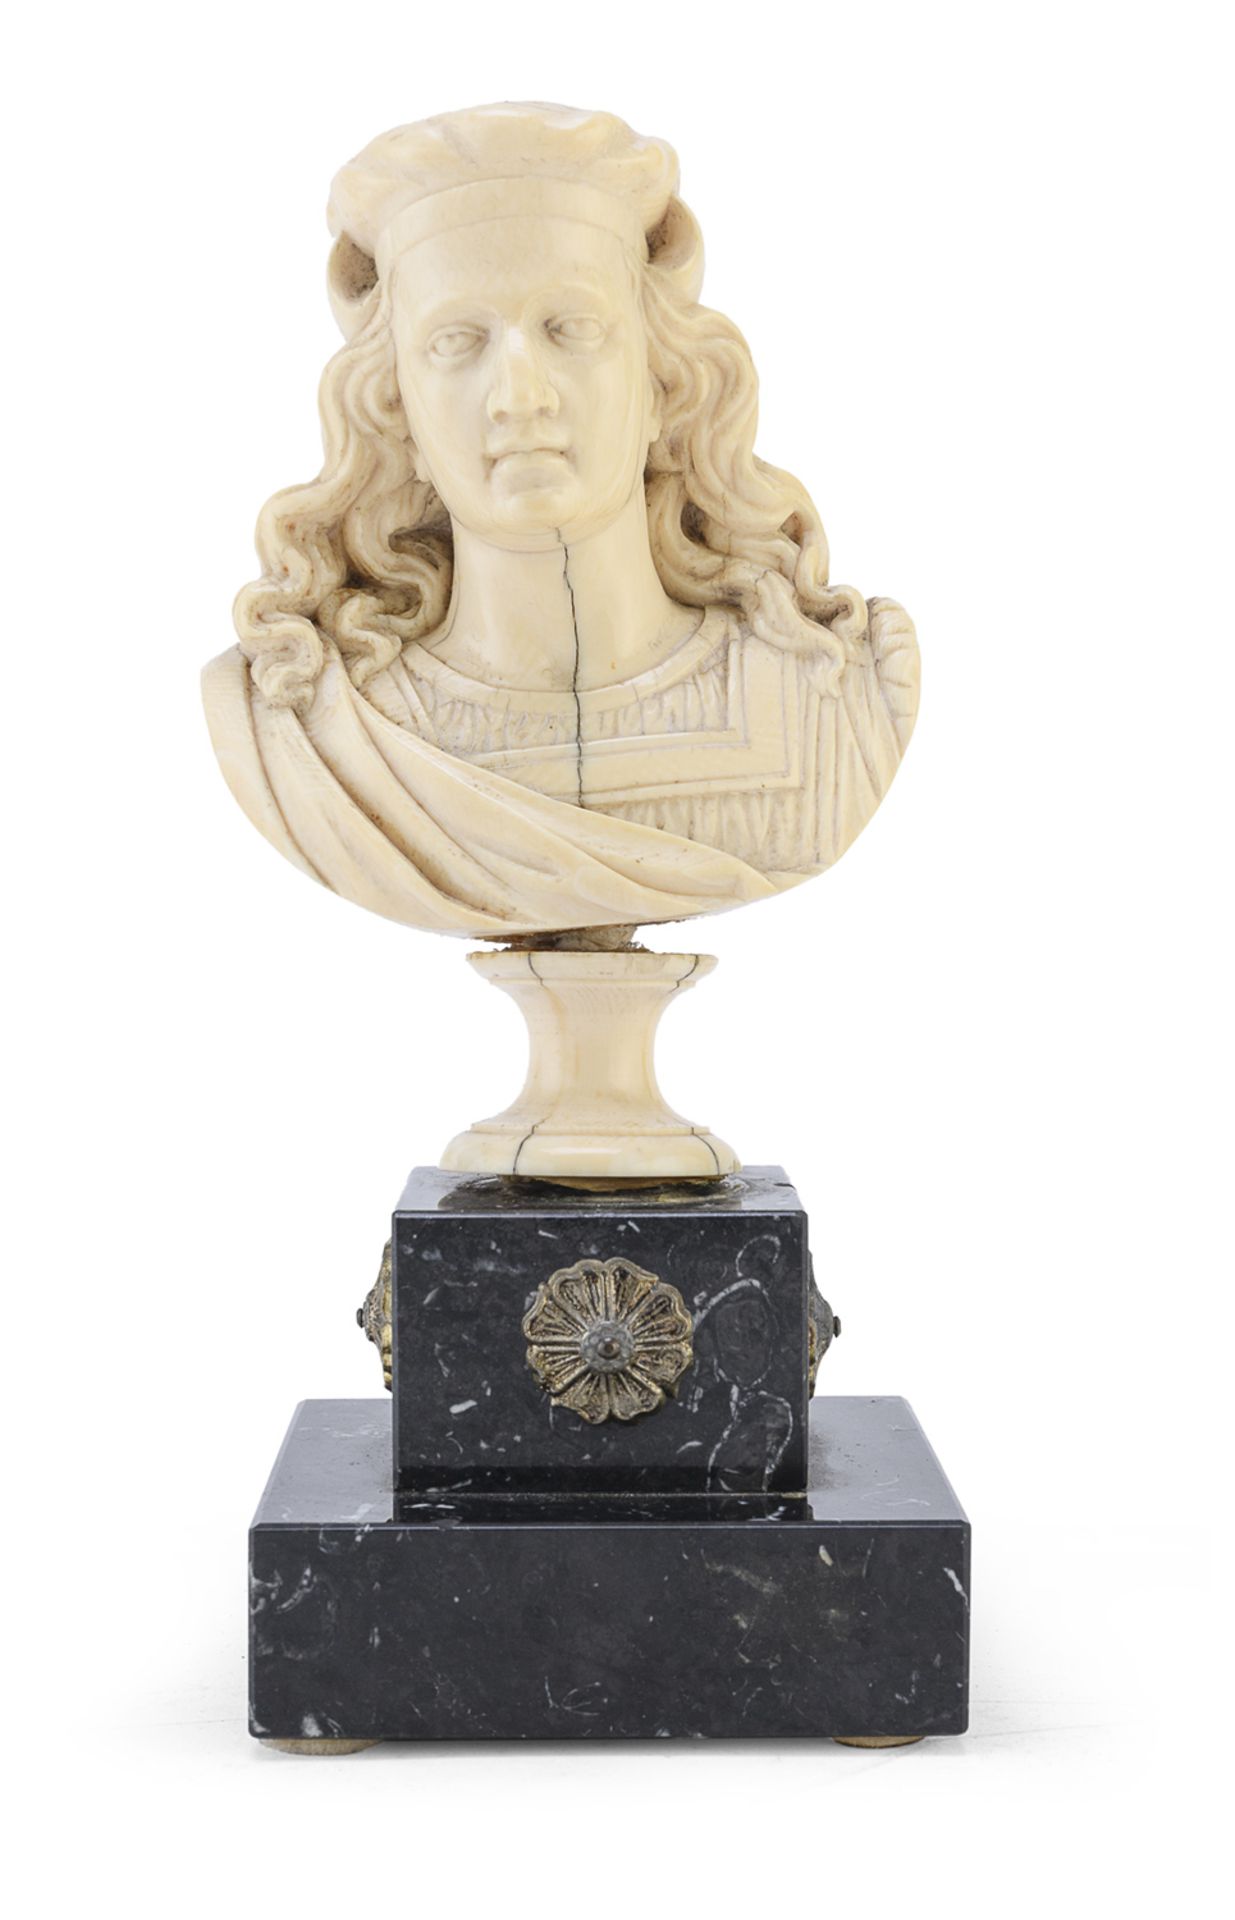 IVORY BUST OF CHRISTOPHER COLUMBUS PROBABLY GERMANY 18TH CENTURY